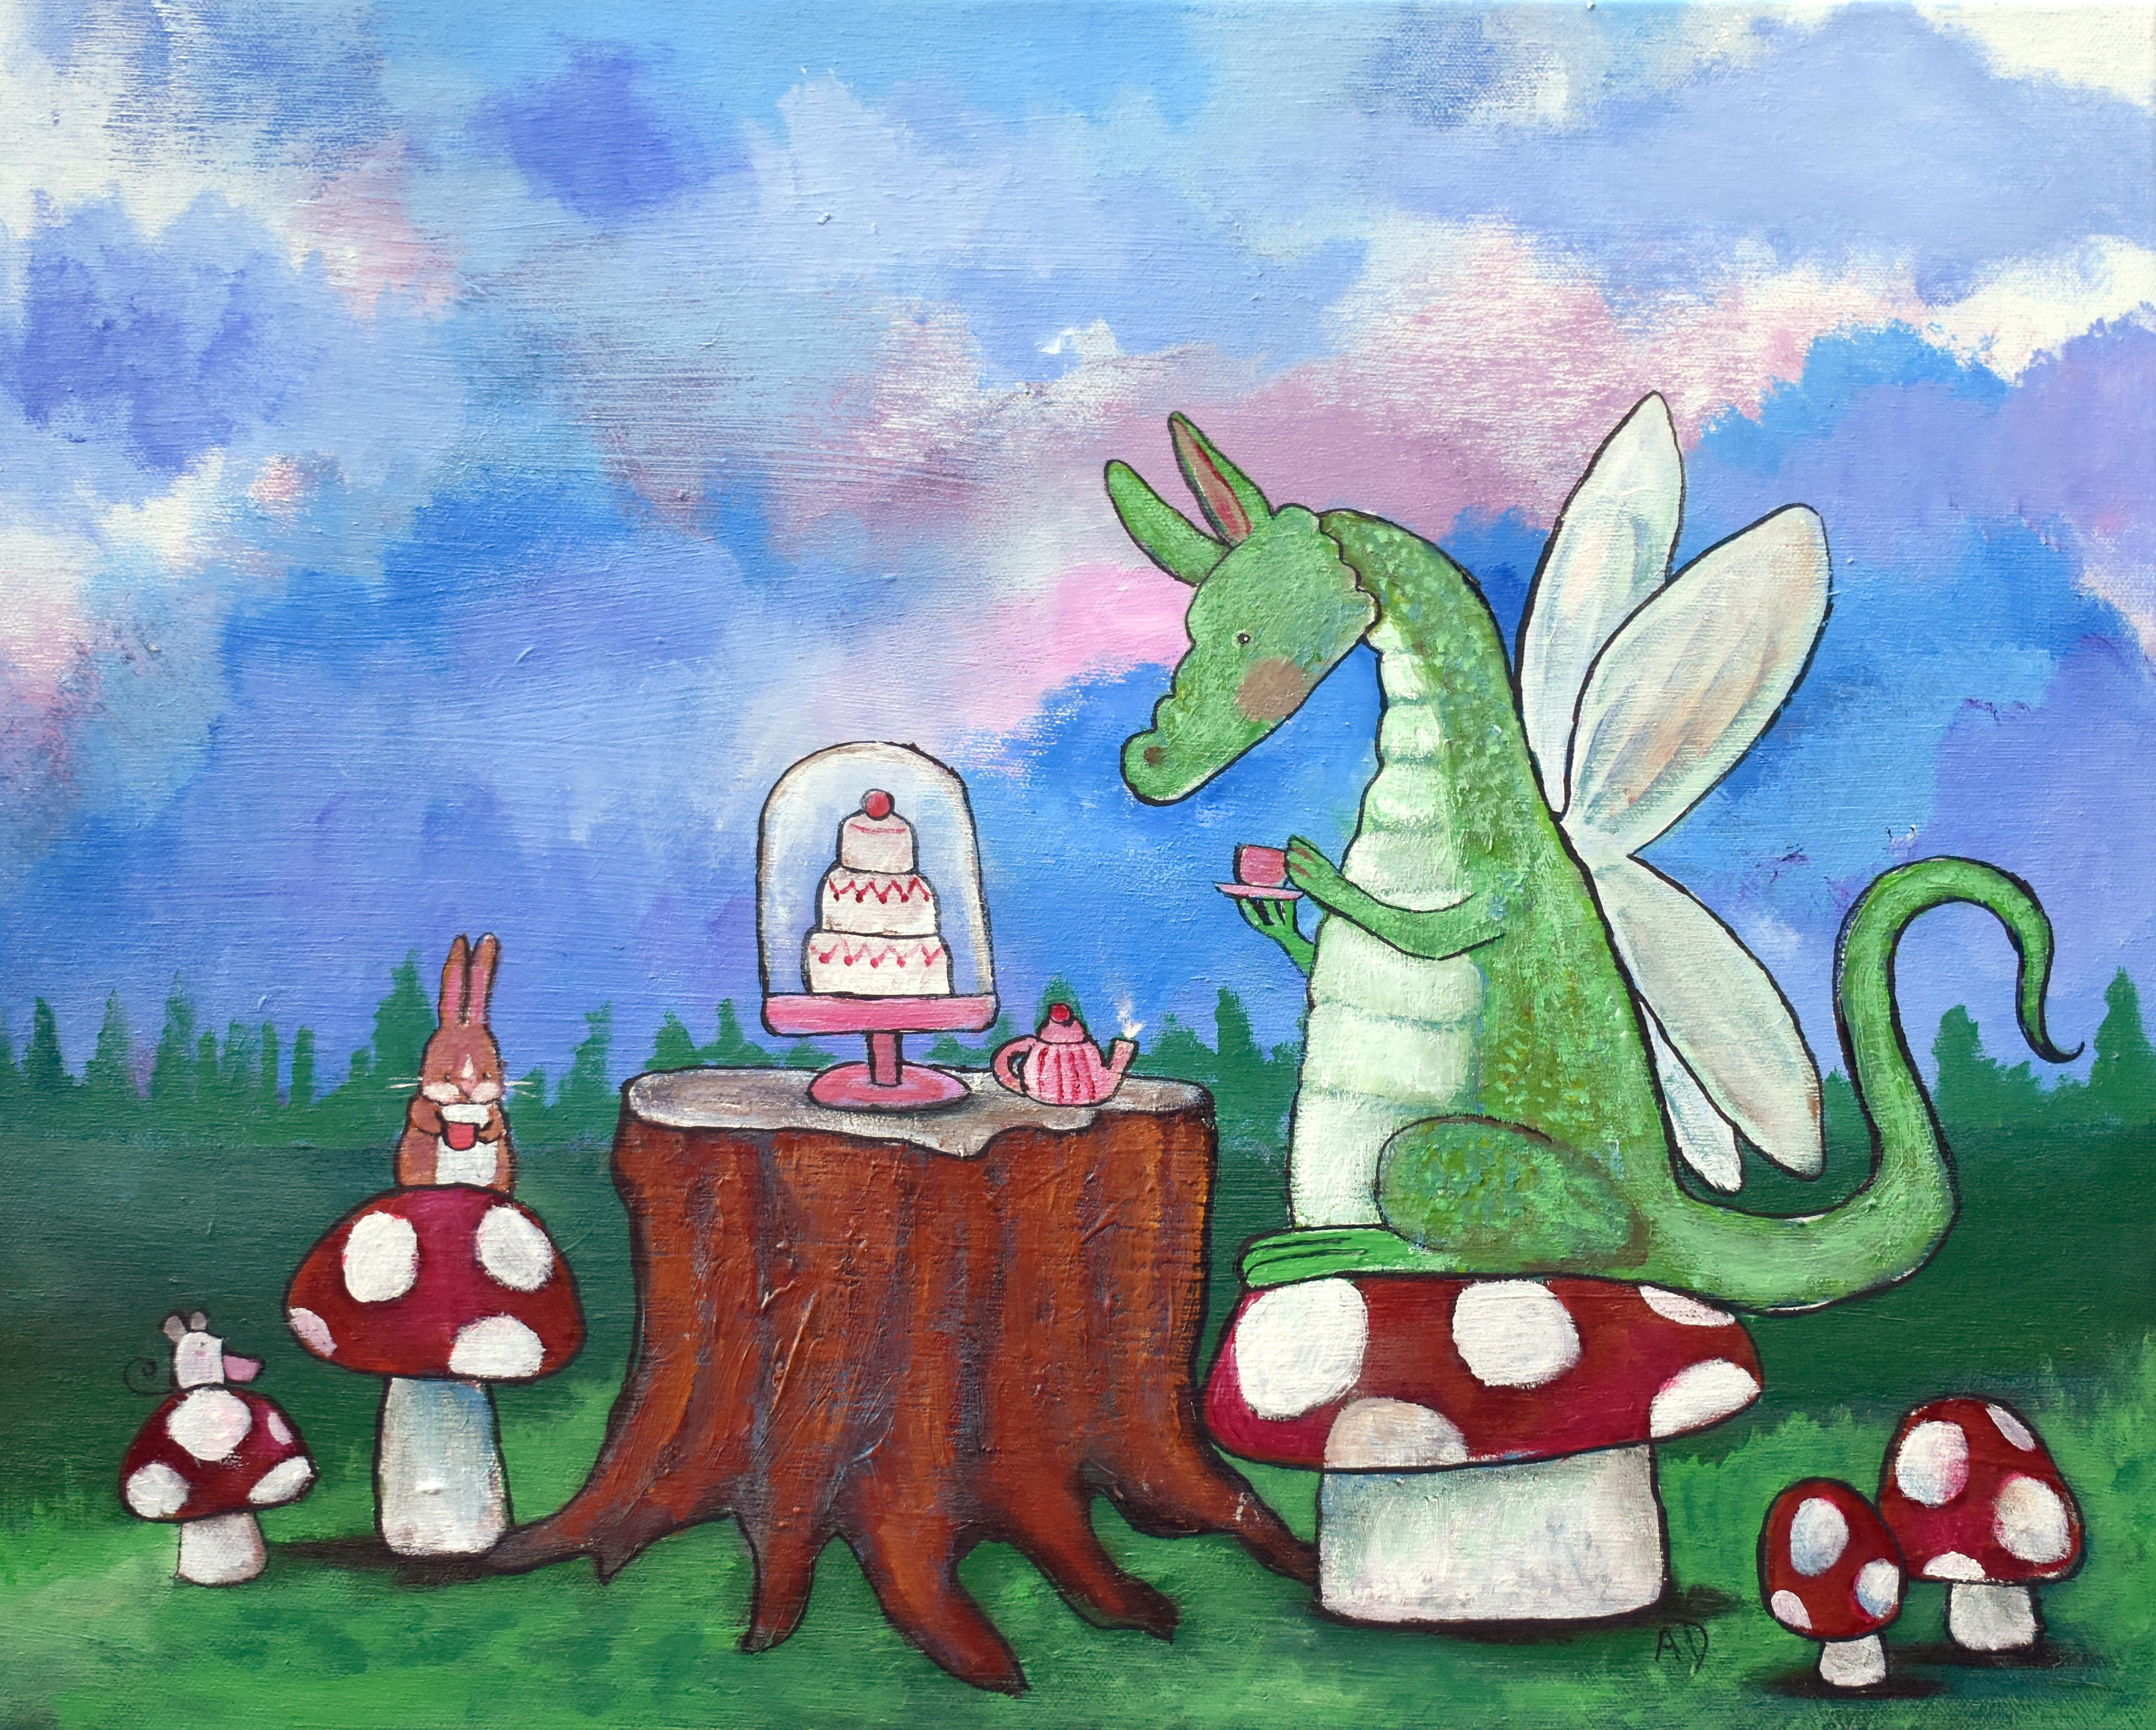 A Whimsical Tea Party, Original Painting - Art by Andrea Doss